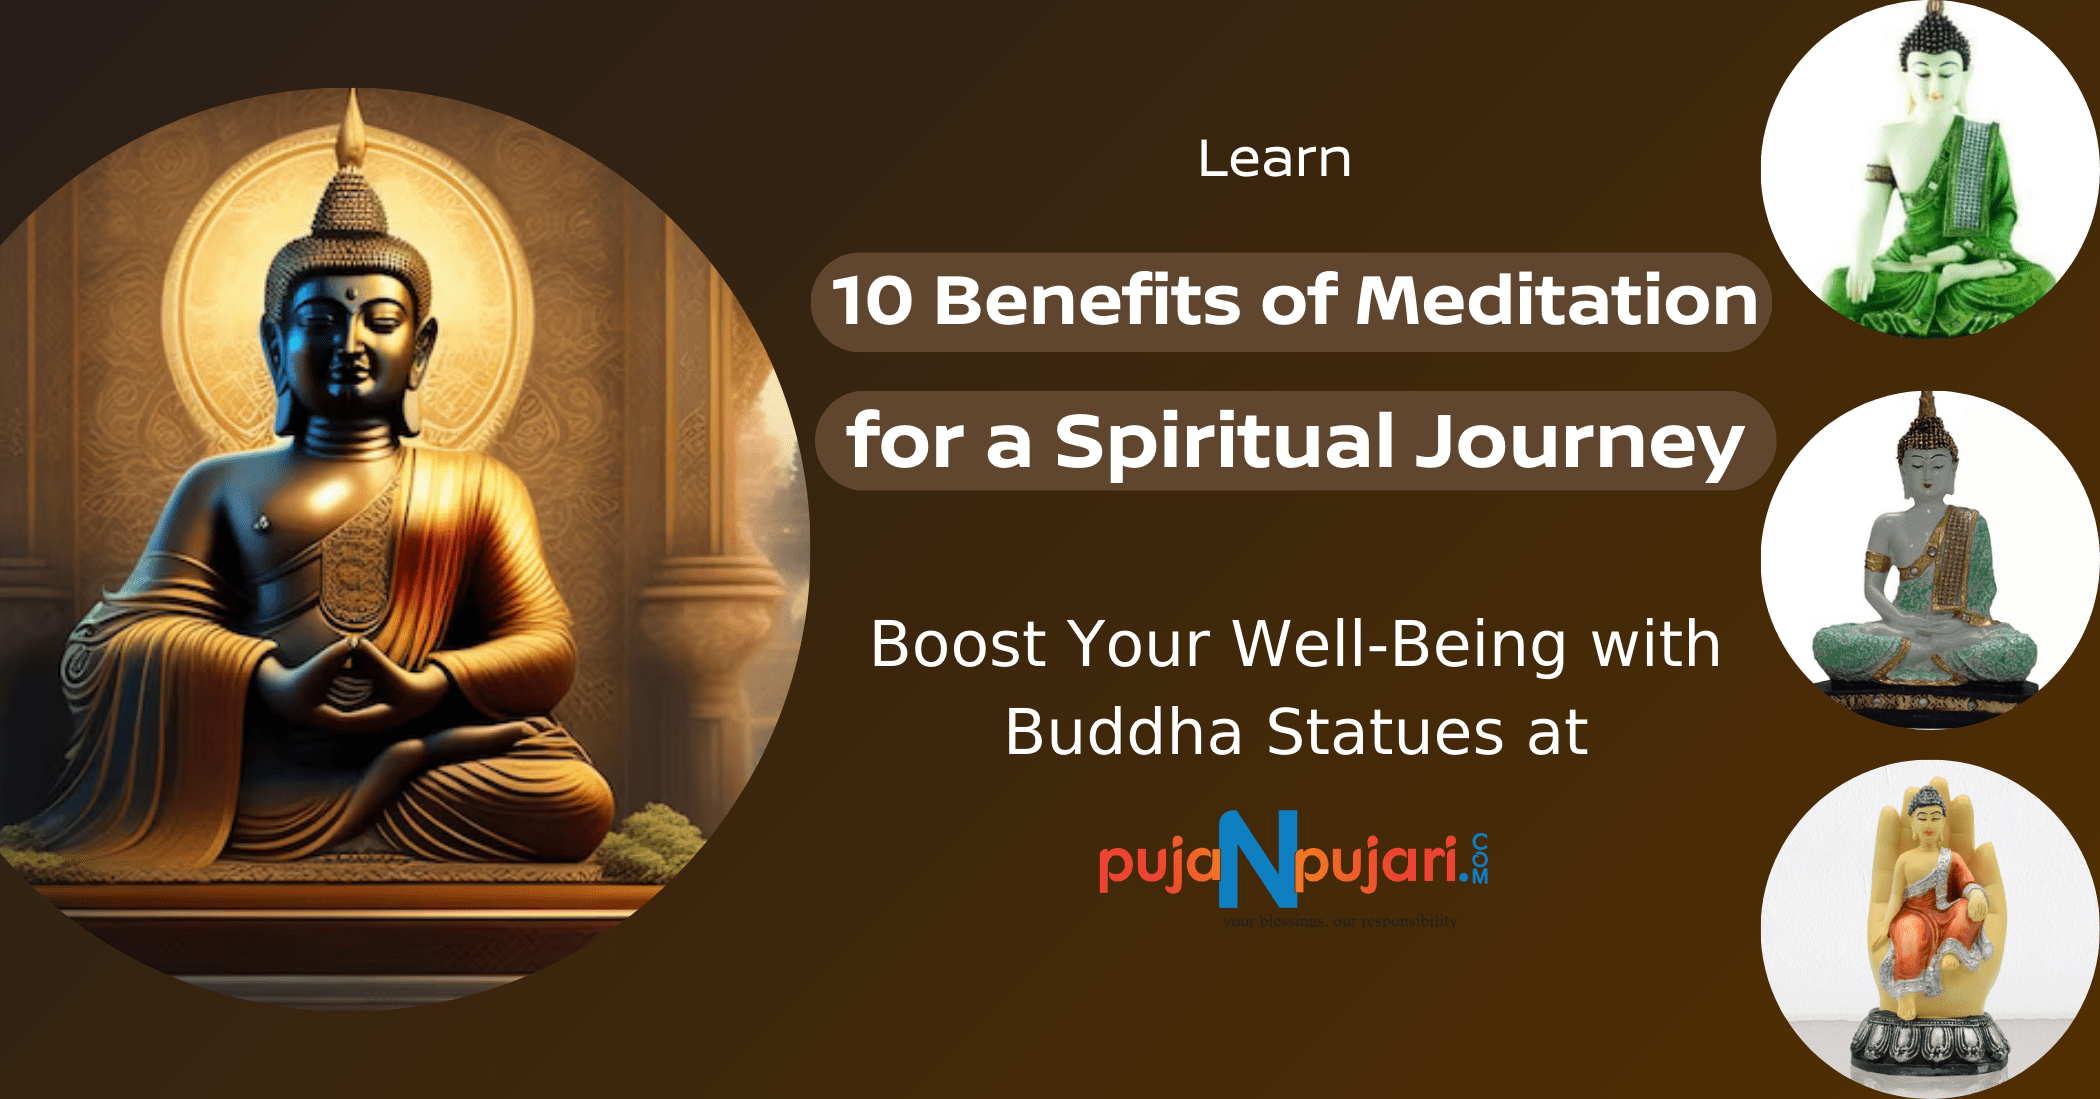 10 Benefits of Meditation for a Spiritual Journey: Boost Your Well-Being with Buddha Statues